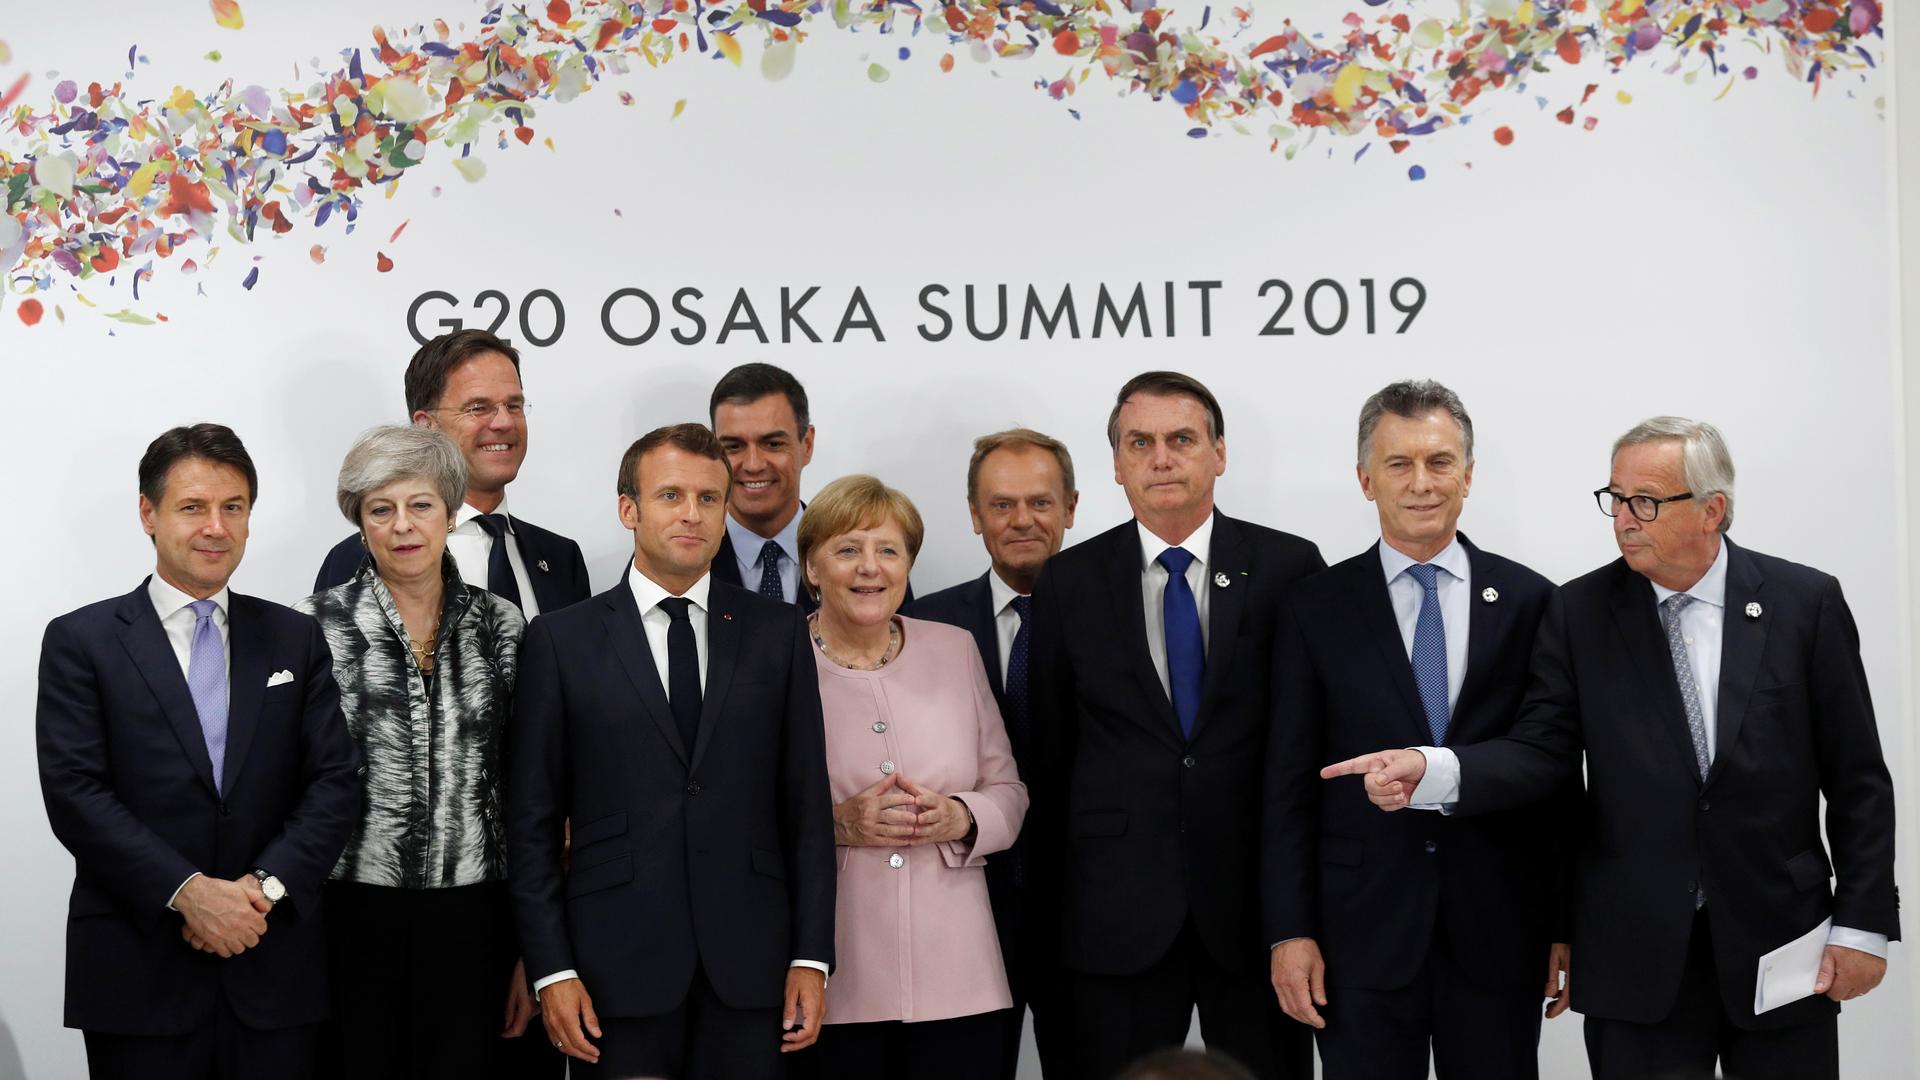 world leaders at the G20 Summit